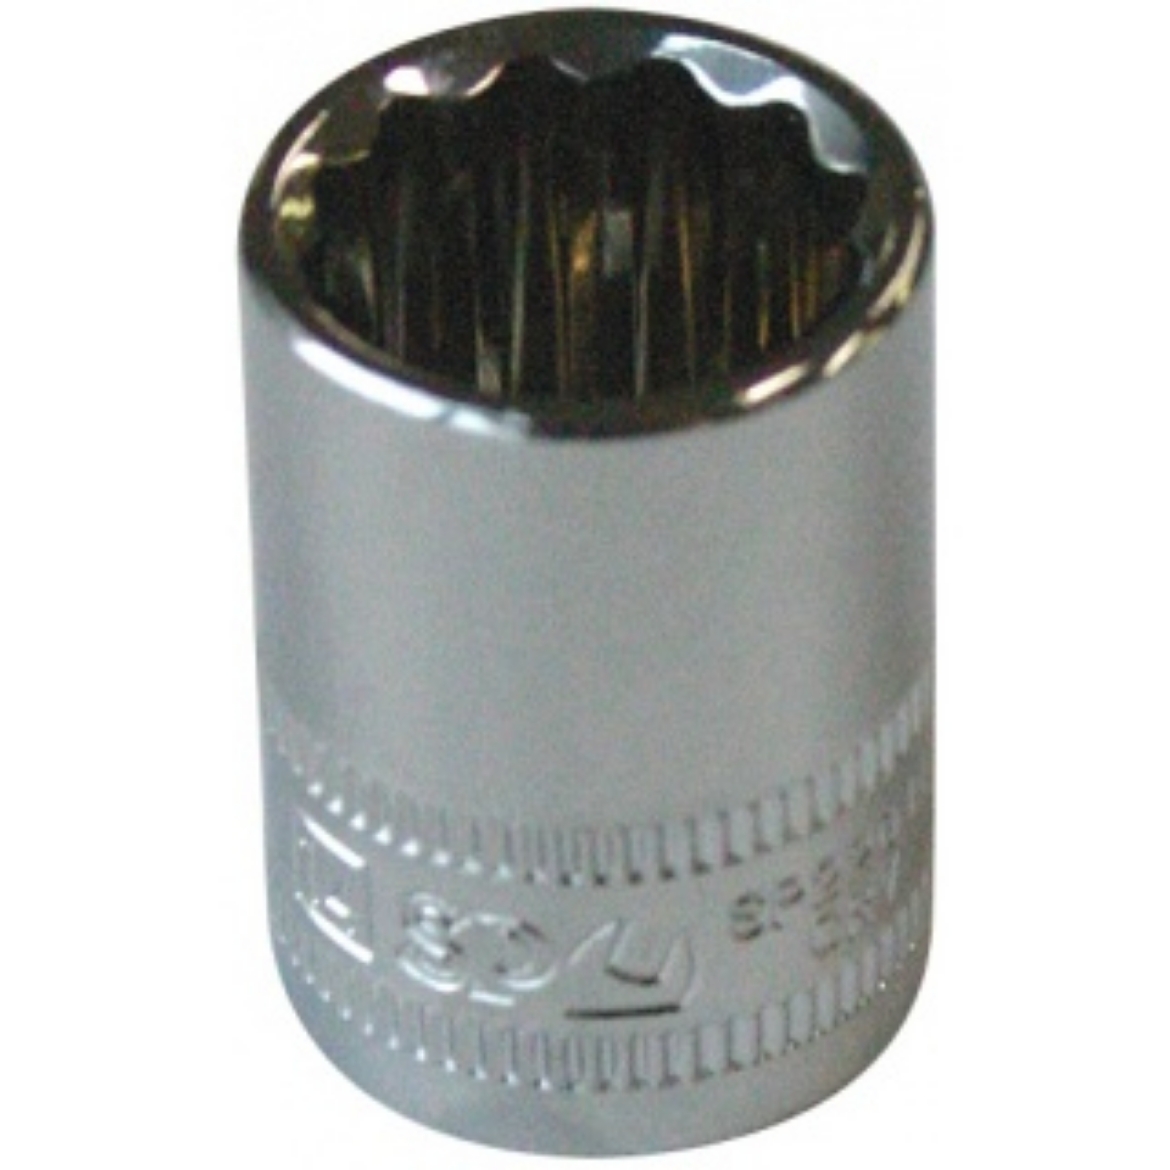 Picture of SOCKET 3/8"DR 12PT METRIC 10MM SP TOOLS